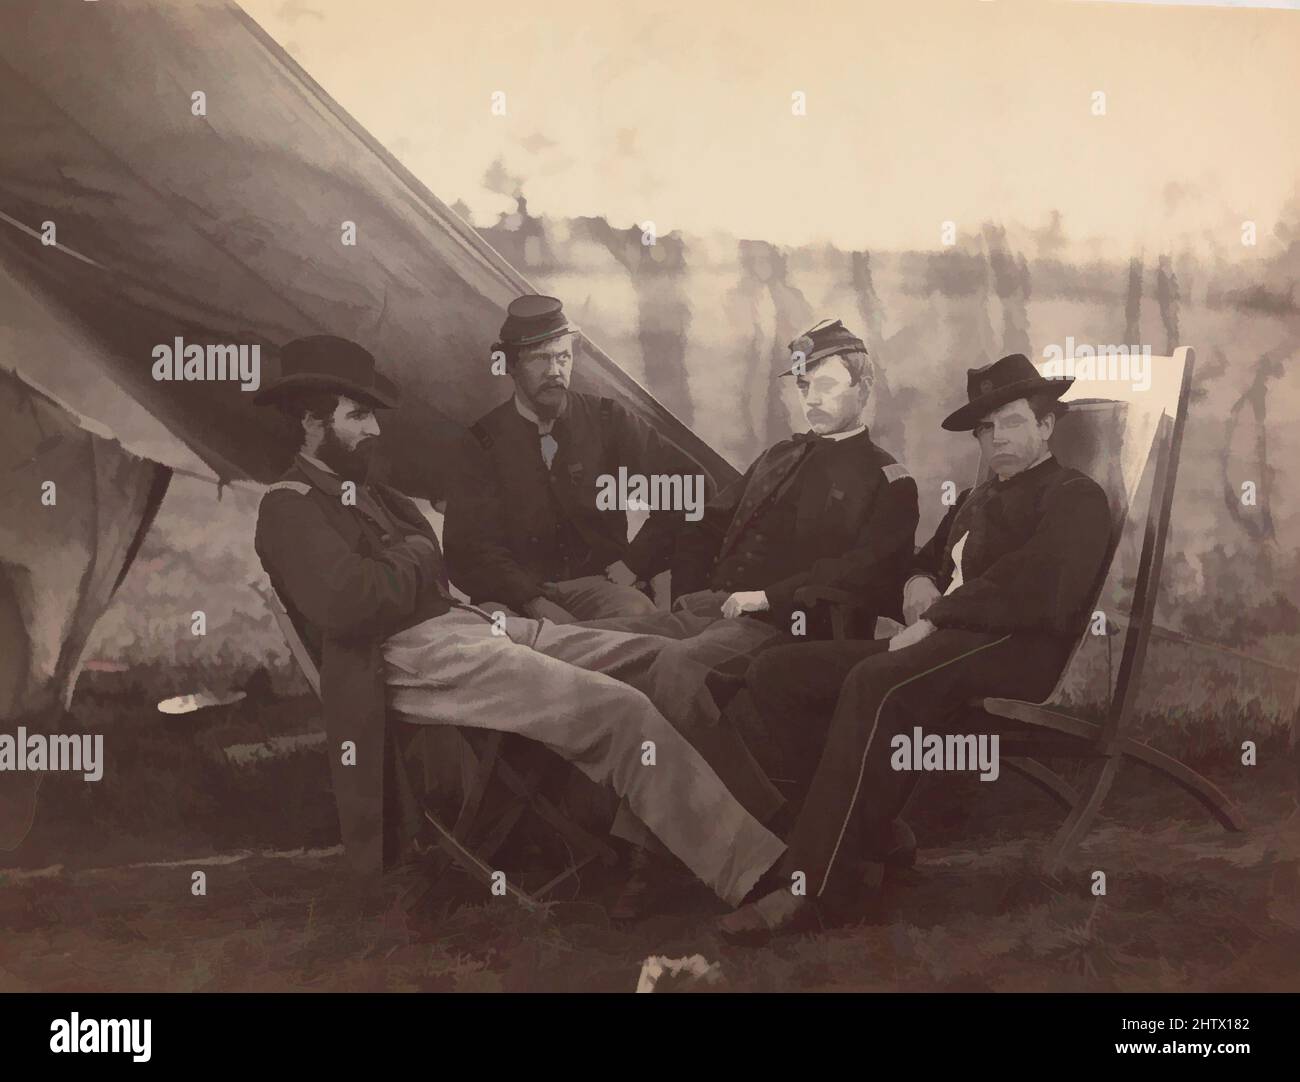 Art inspired by Four Officers, ca. 1864, Albumen silver print from glass negative, Image: 17.8 x 22.8 cm (7 x 9 in.), Photographs, Alexander Gardner (American, Glasgow, Scotland 1821–1882 Washington, D.C.), Gardner was an expert in the new wet-collodion-on-glass-plate process of, Classic works modernized by Artotop with a splash of modernity. Shapes, color and value, eye-catching visual impact on art. Emotions through freedom of artworks in a contemporary way. A timeless message pursuing a wildly creative new direction. Artists turning to the digital medium and creating the Artotop NFT Stock Photo